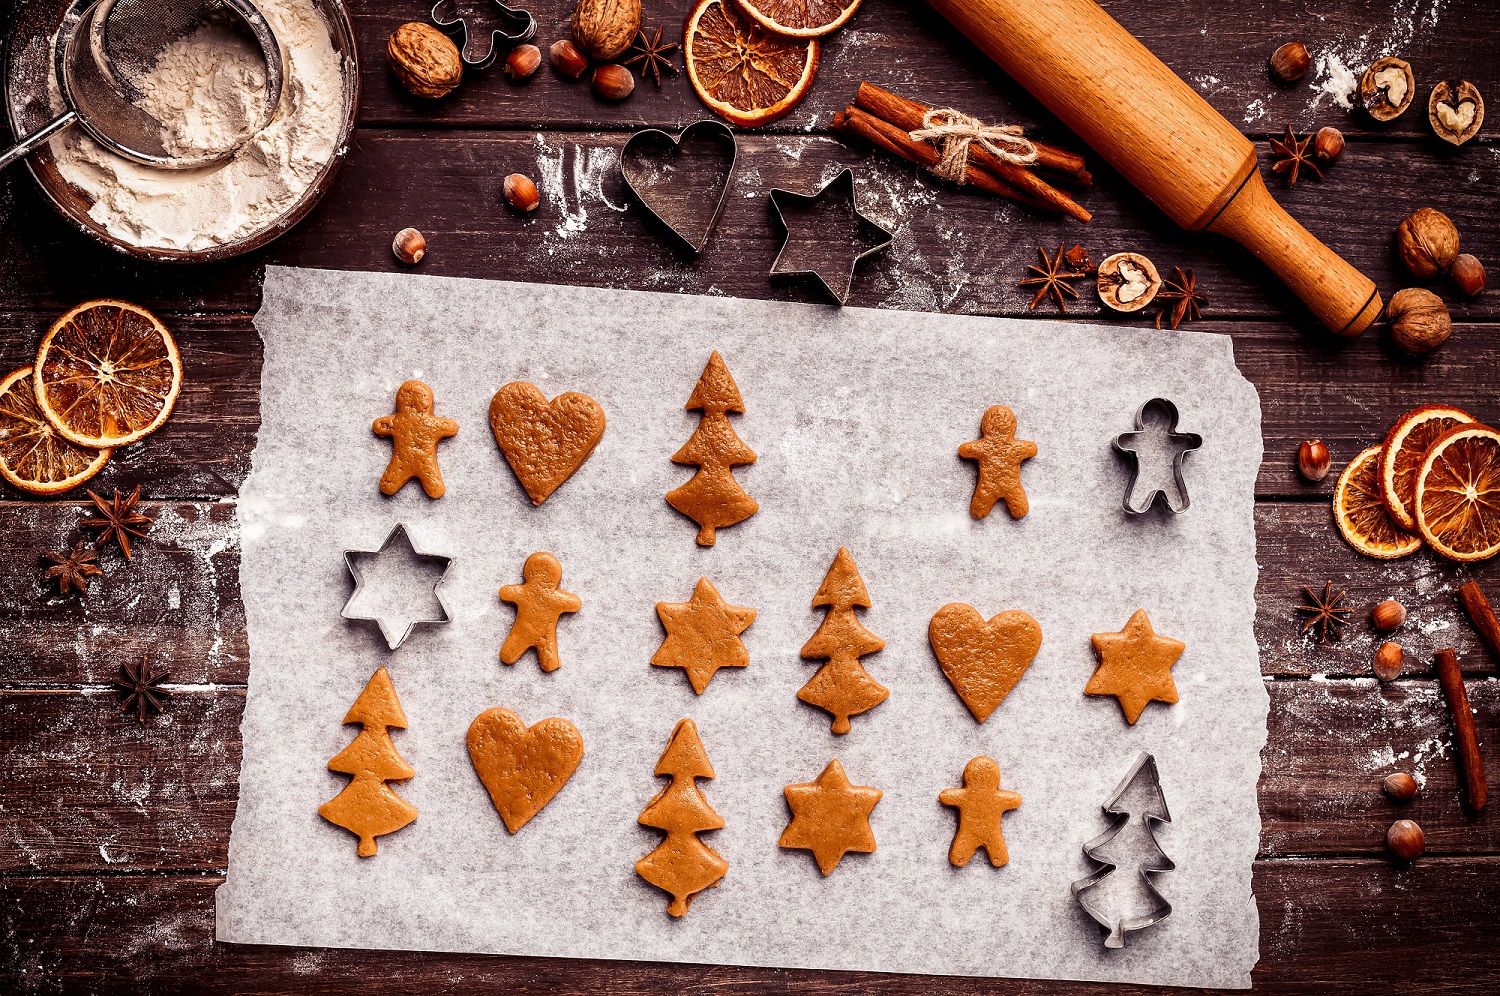 Gingerbread dough cut into festive shapes with holiday cookie cutters.